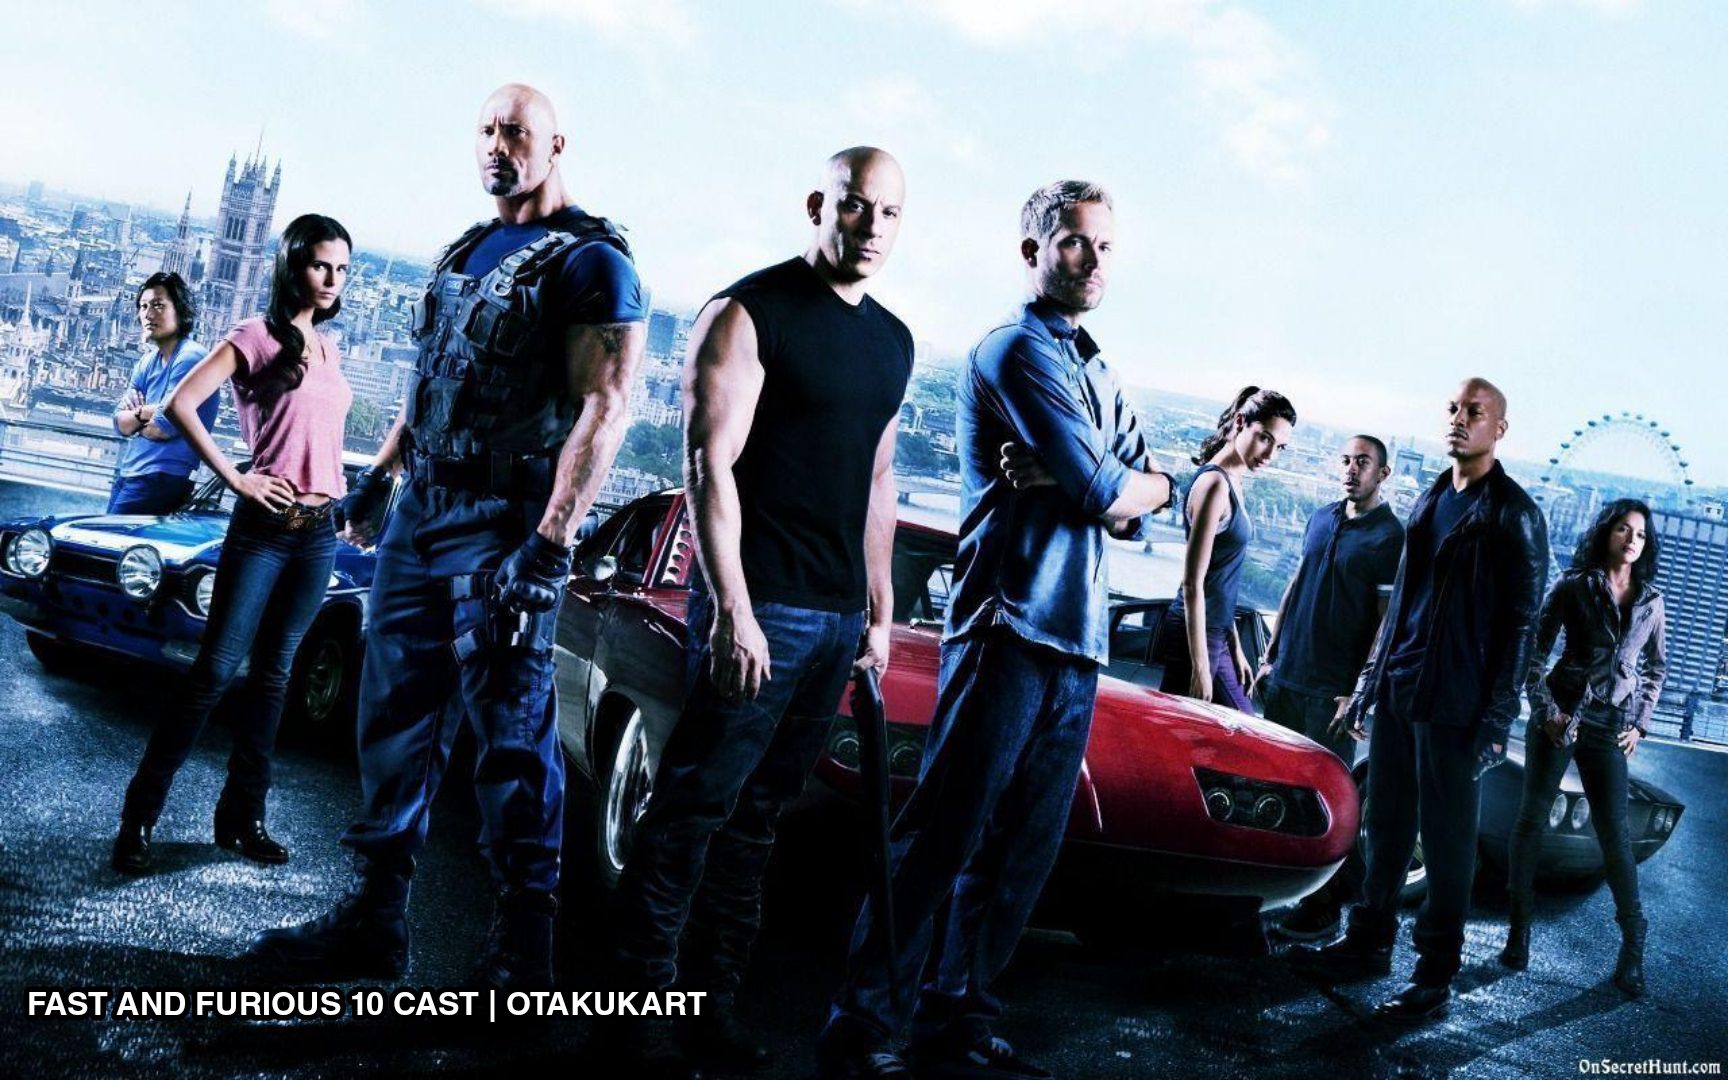 Cast of Fast and Furious 10